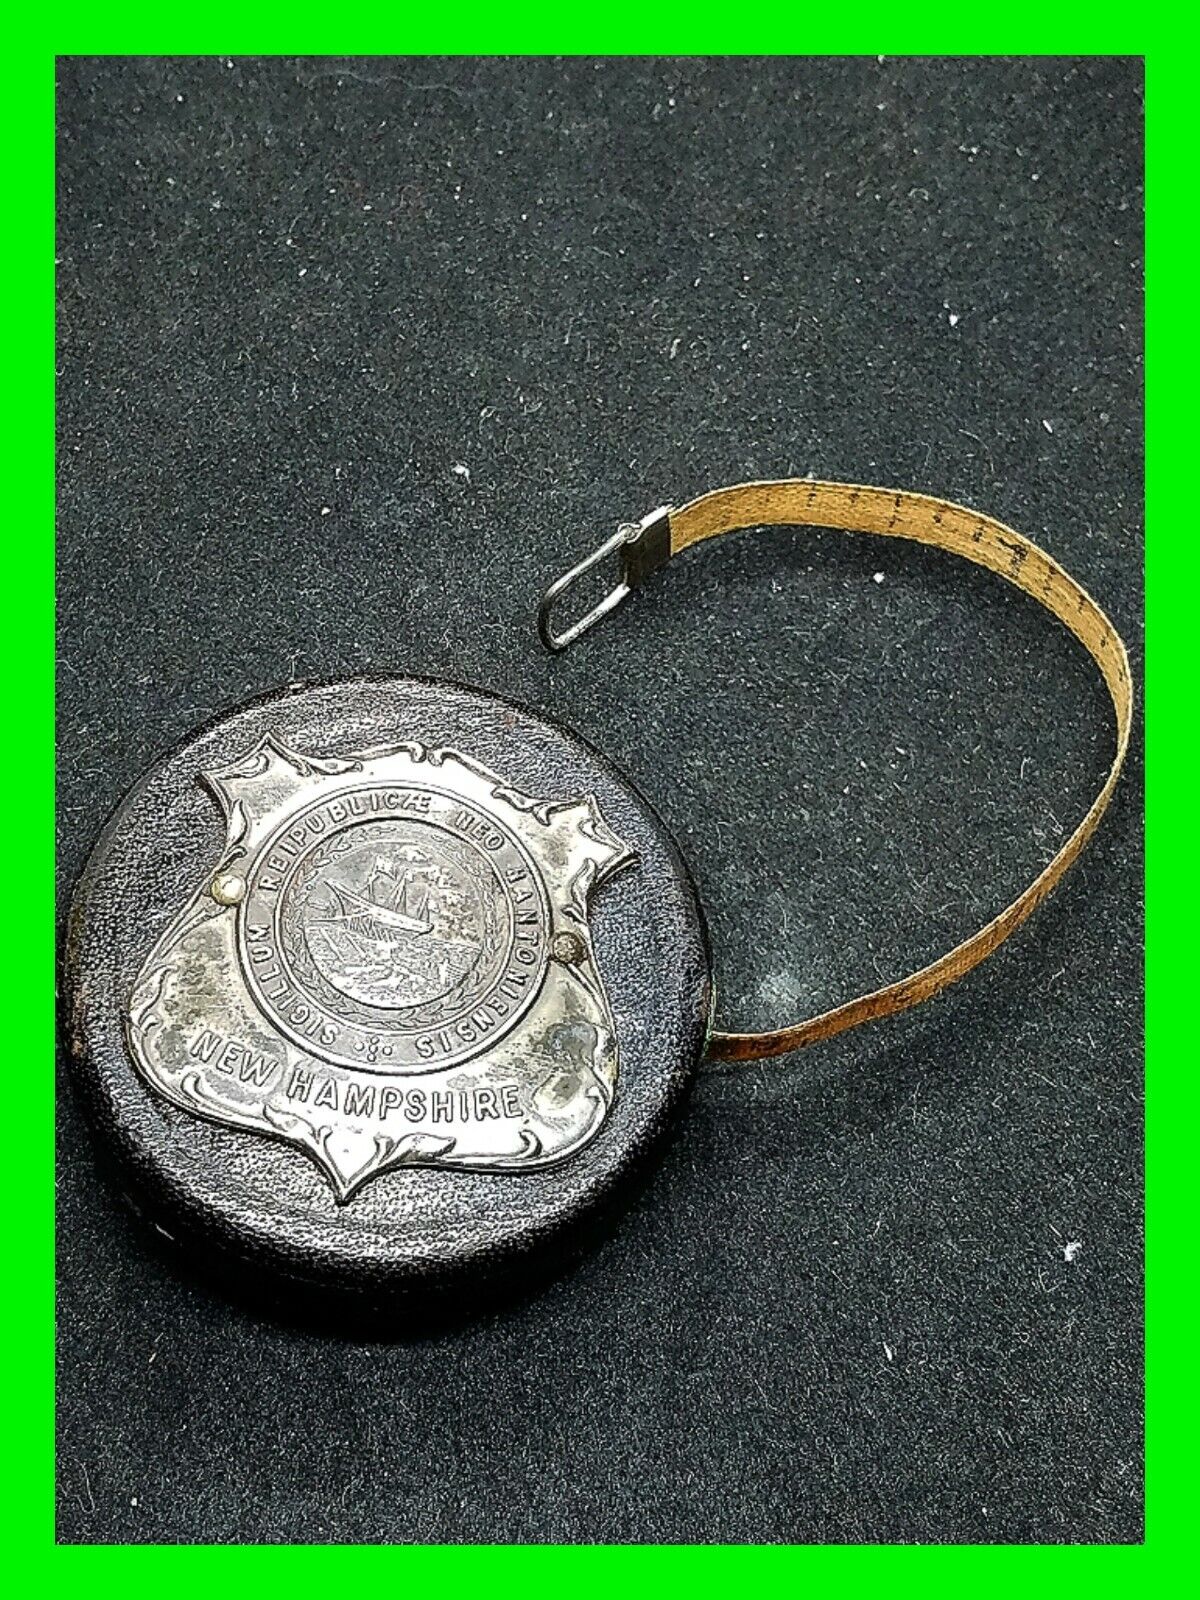 Early Antique Tape Measure With Great Seal Of New Hampshire Badge 